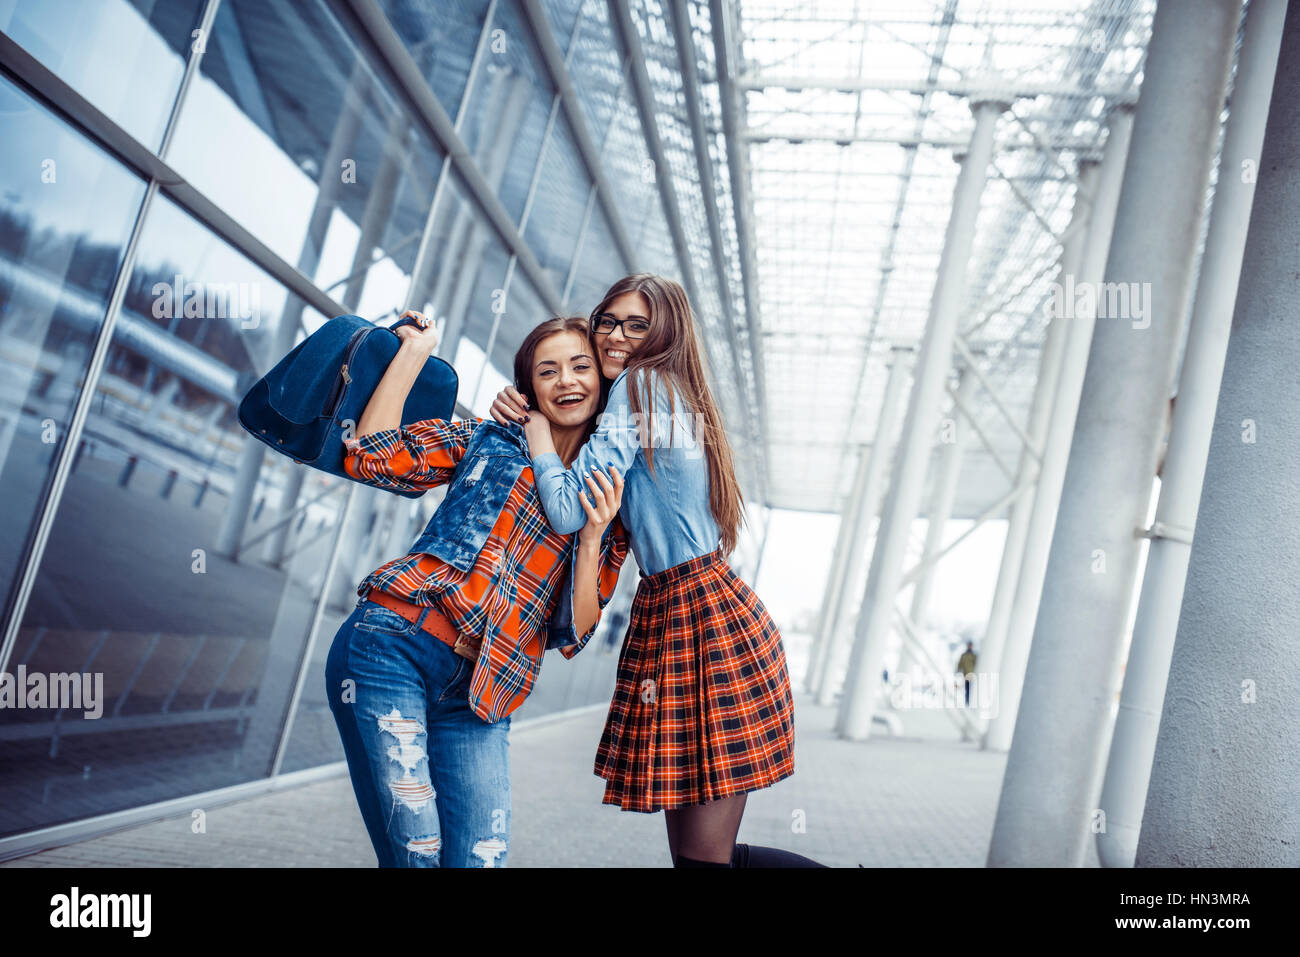 Girls having fun and happy when they met at the airport.Art proc Stock Photo